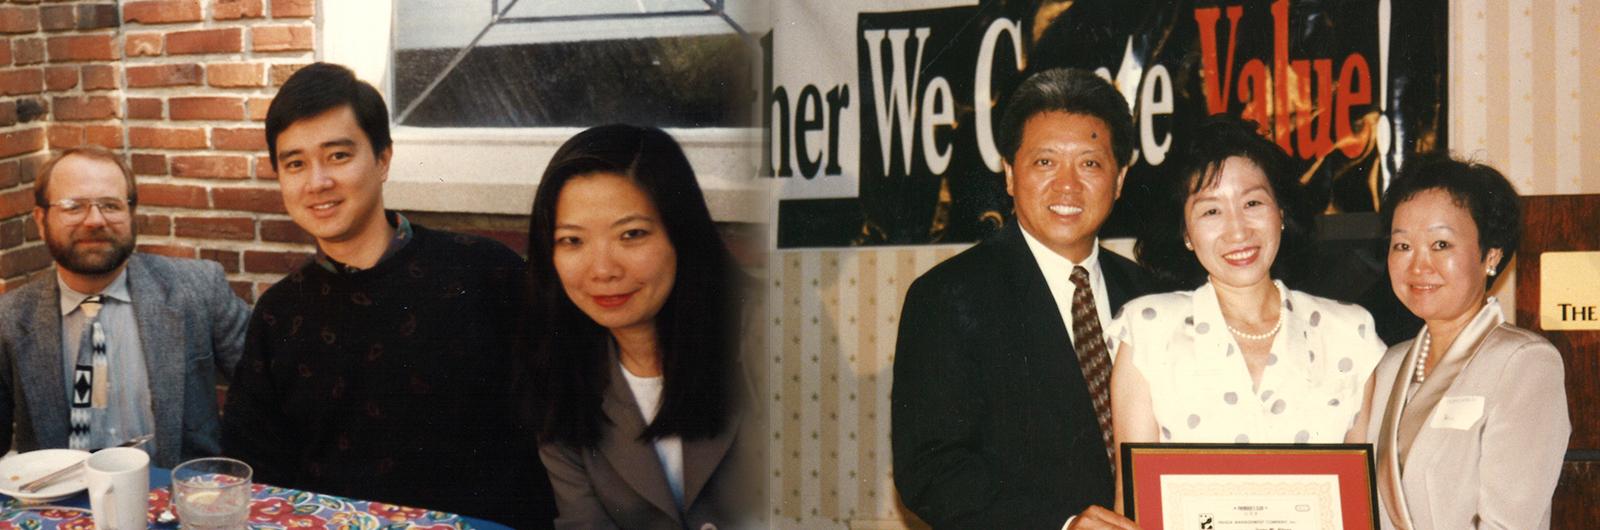 Irene Cherng and Stanley Liu